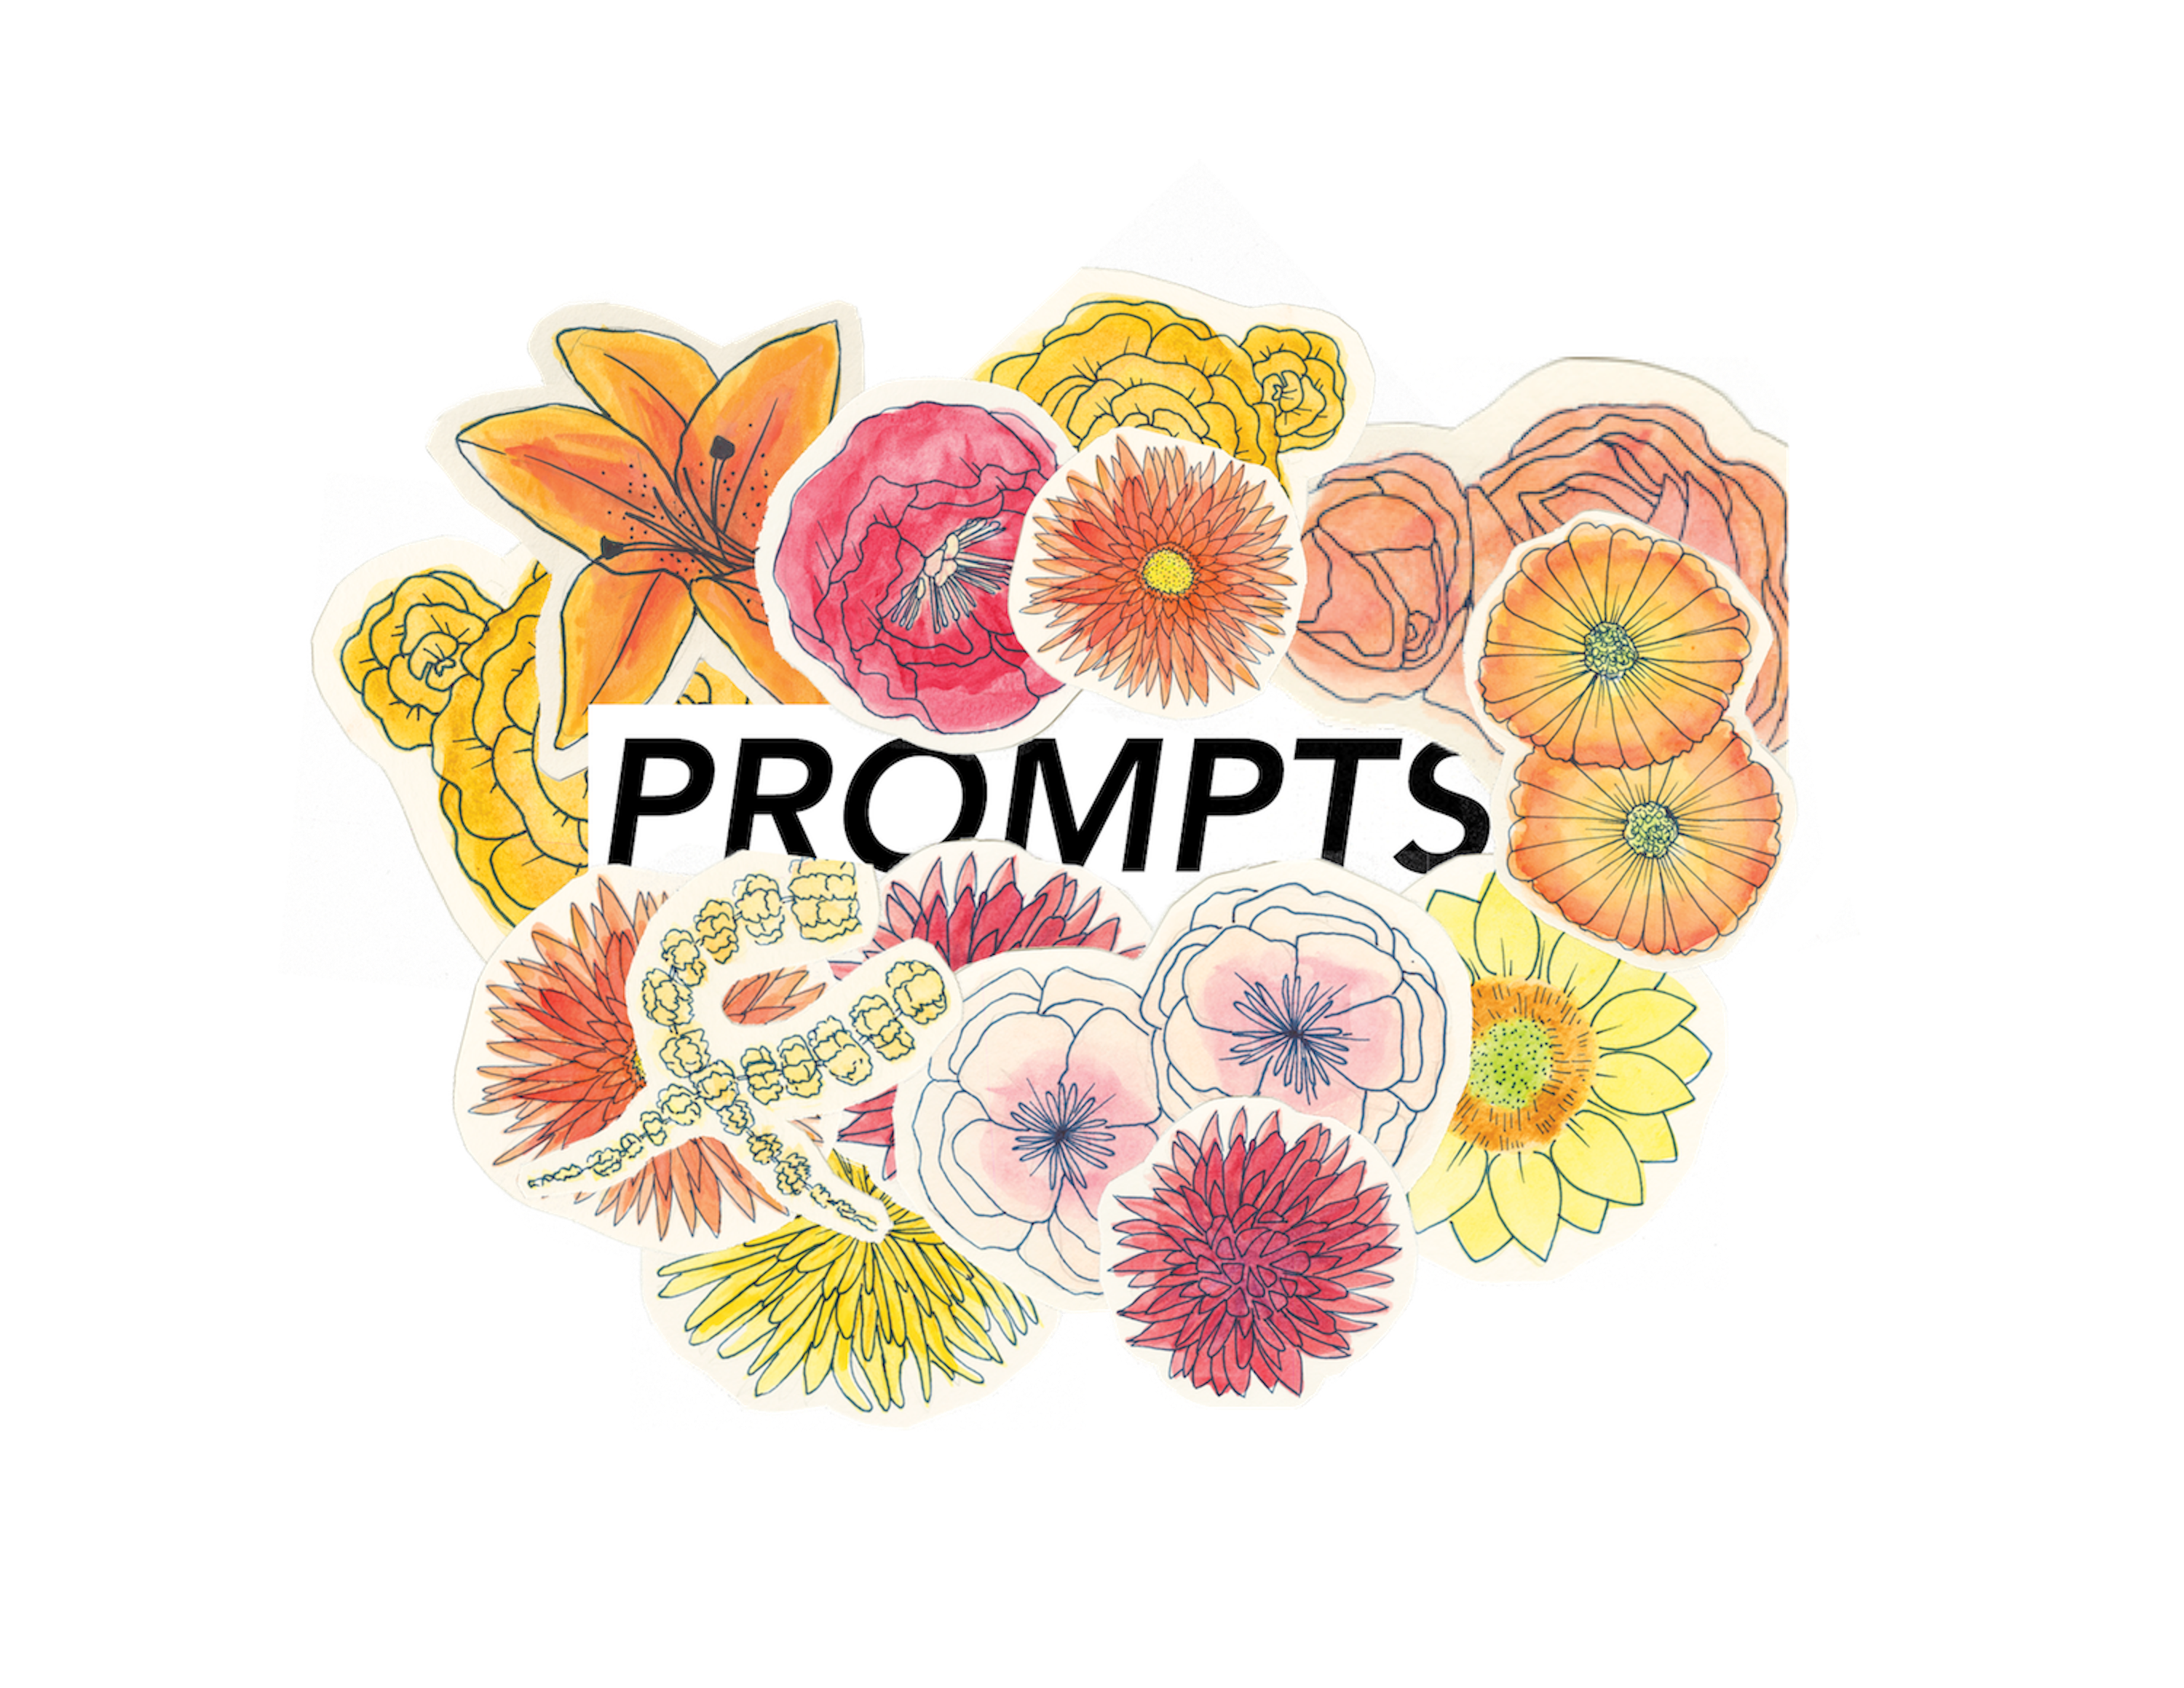 Text that reads "Prompts" sits amid a bed of hand-drawn, brightly colored flowers